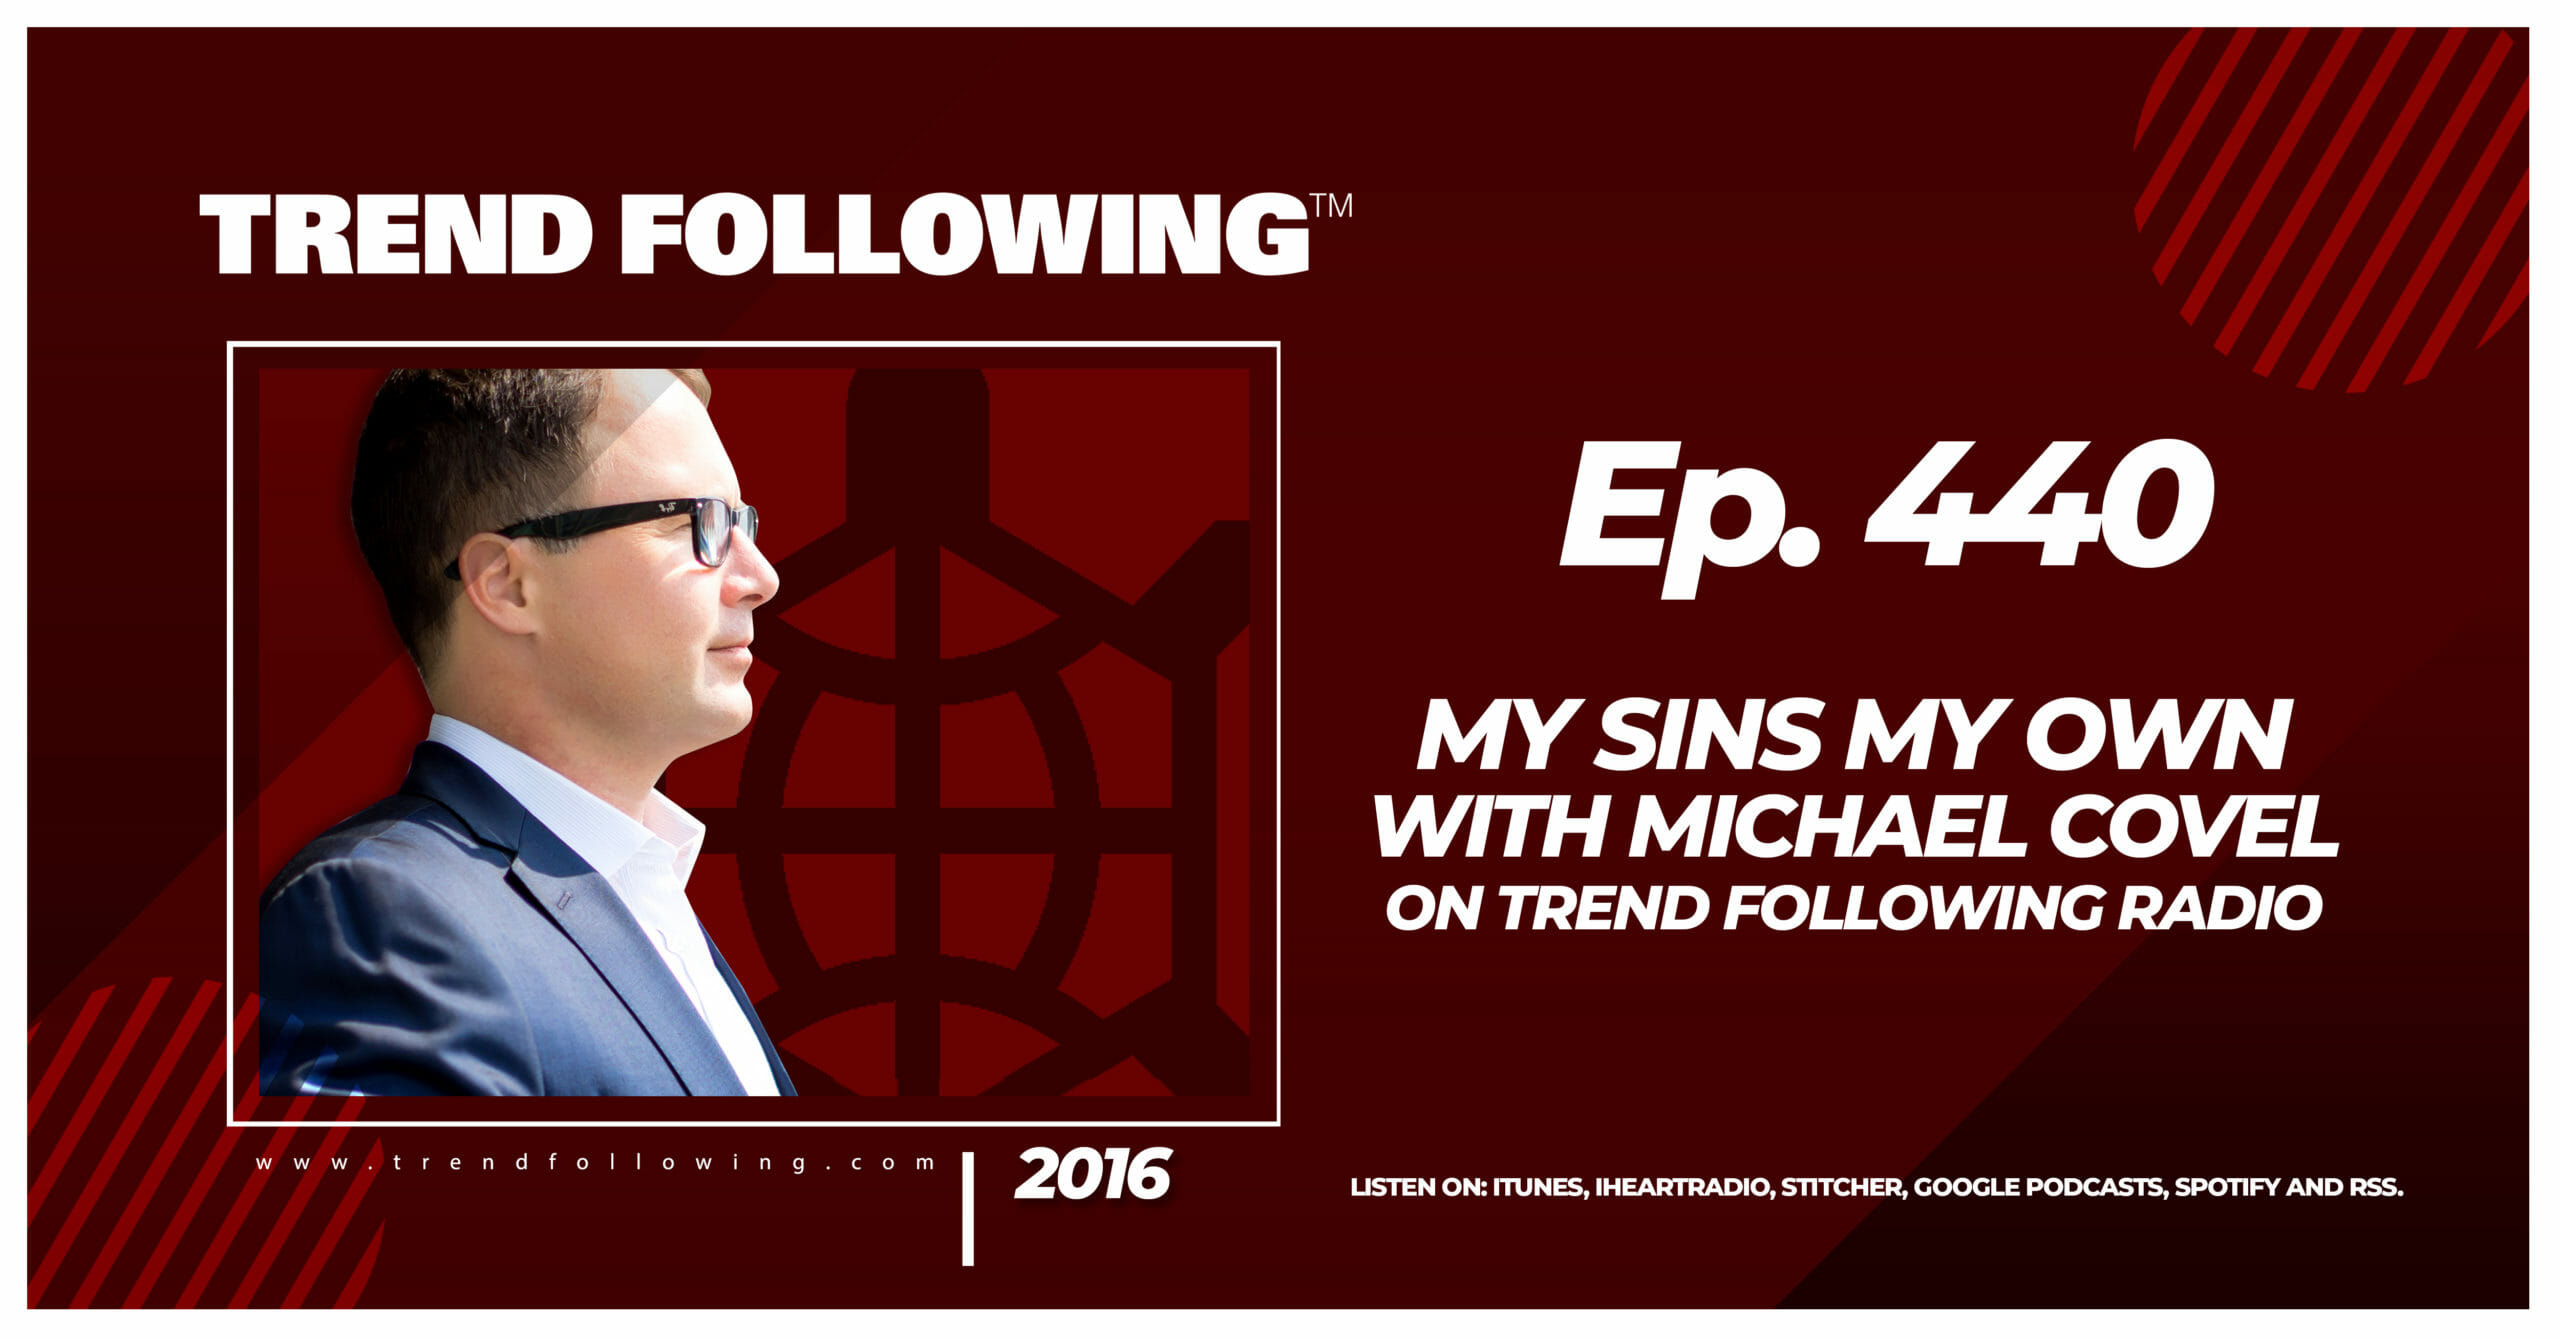 My Sins My Own with Michael Covel on Trend Following Radio